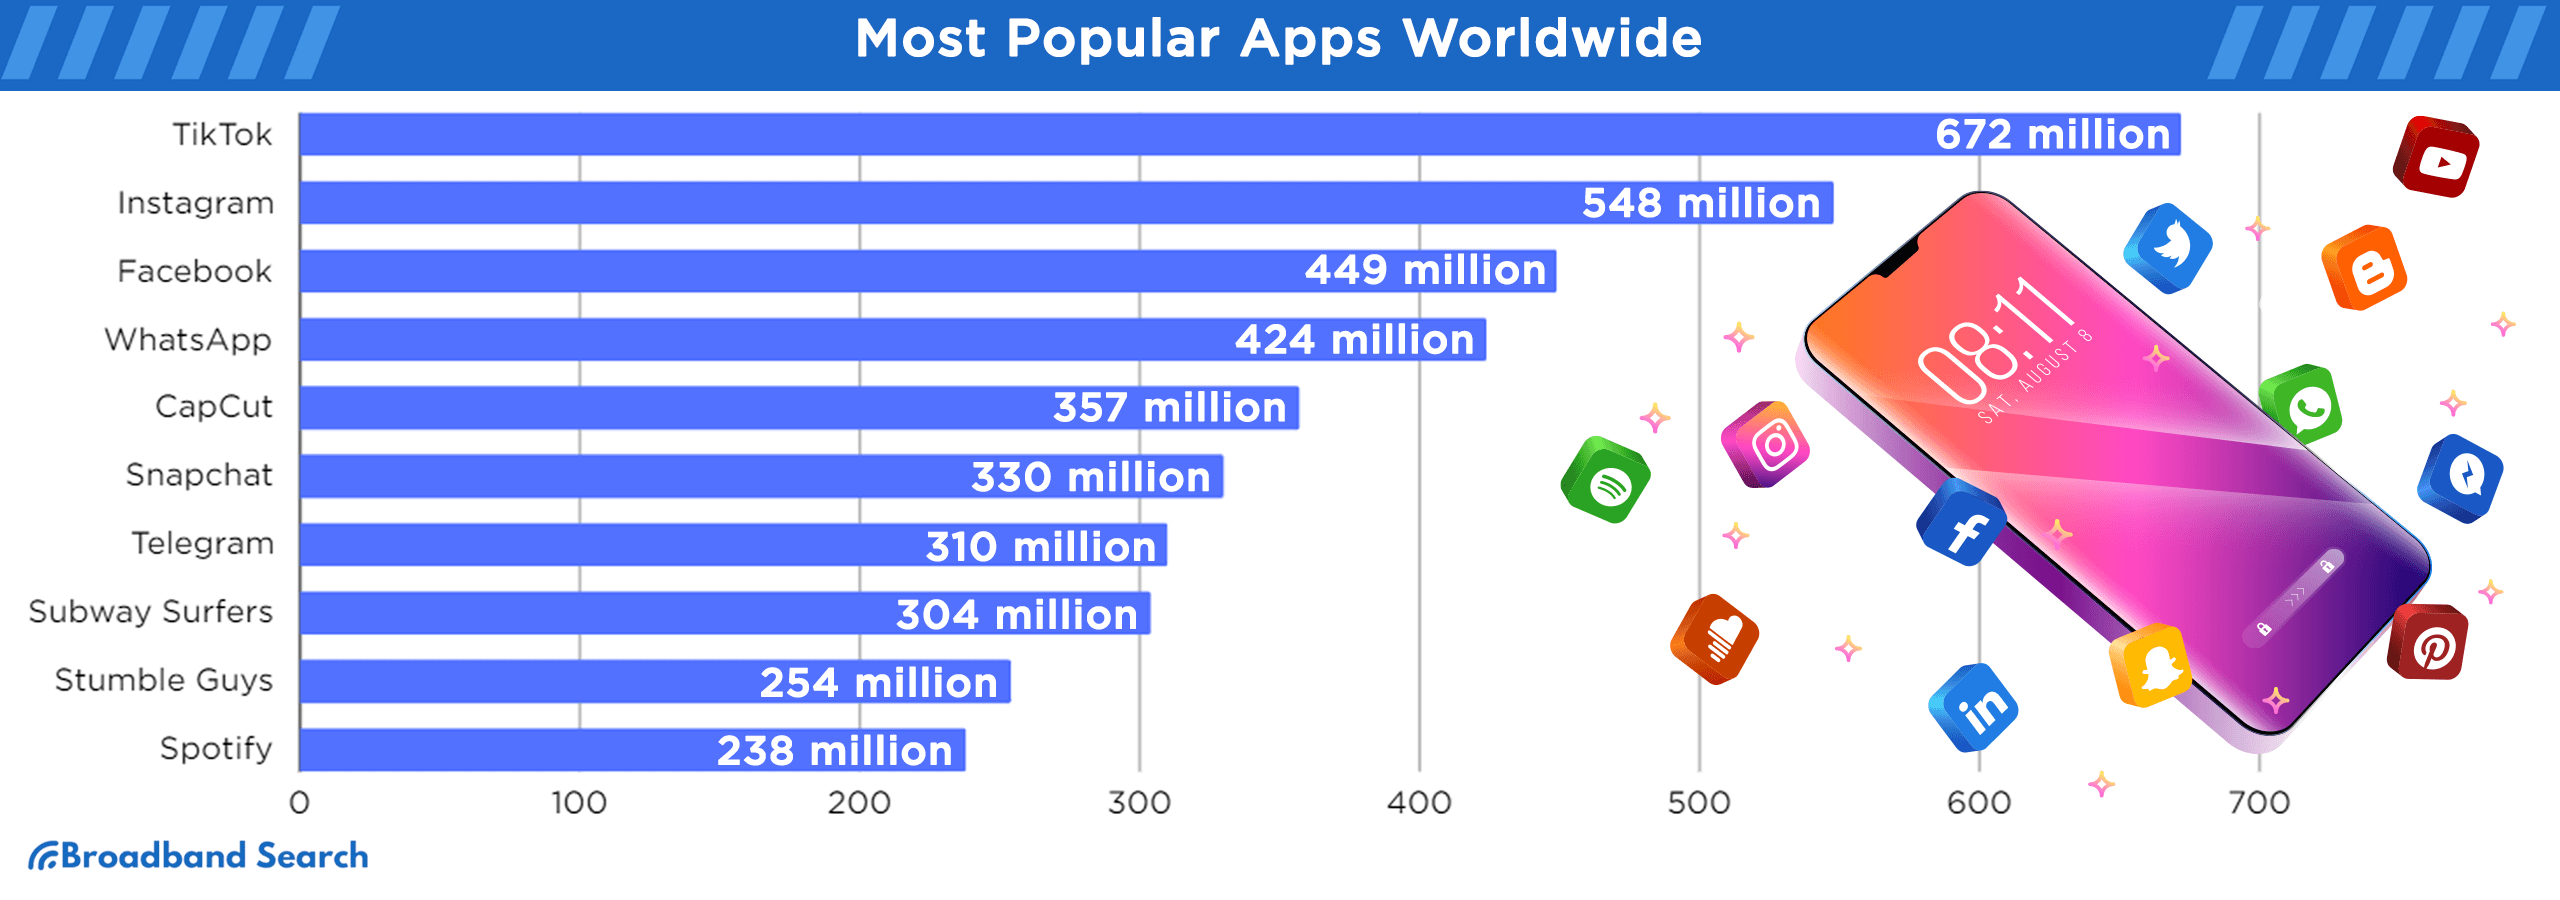 Comparison of the most popular apps worldwide where numbers are shown in the millions